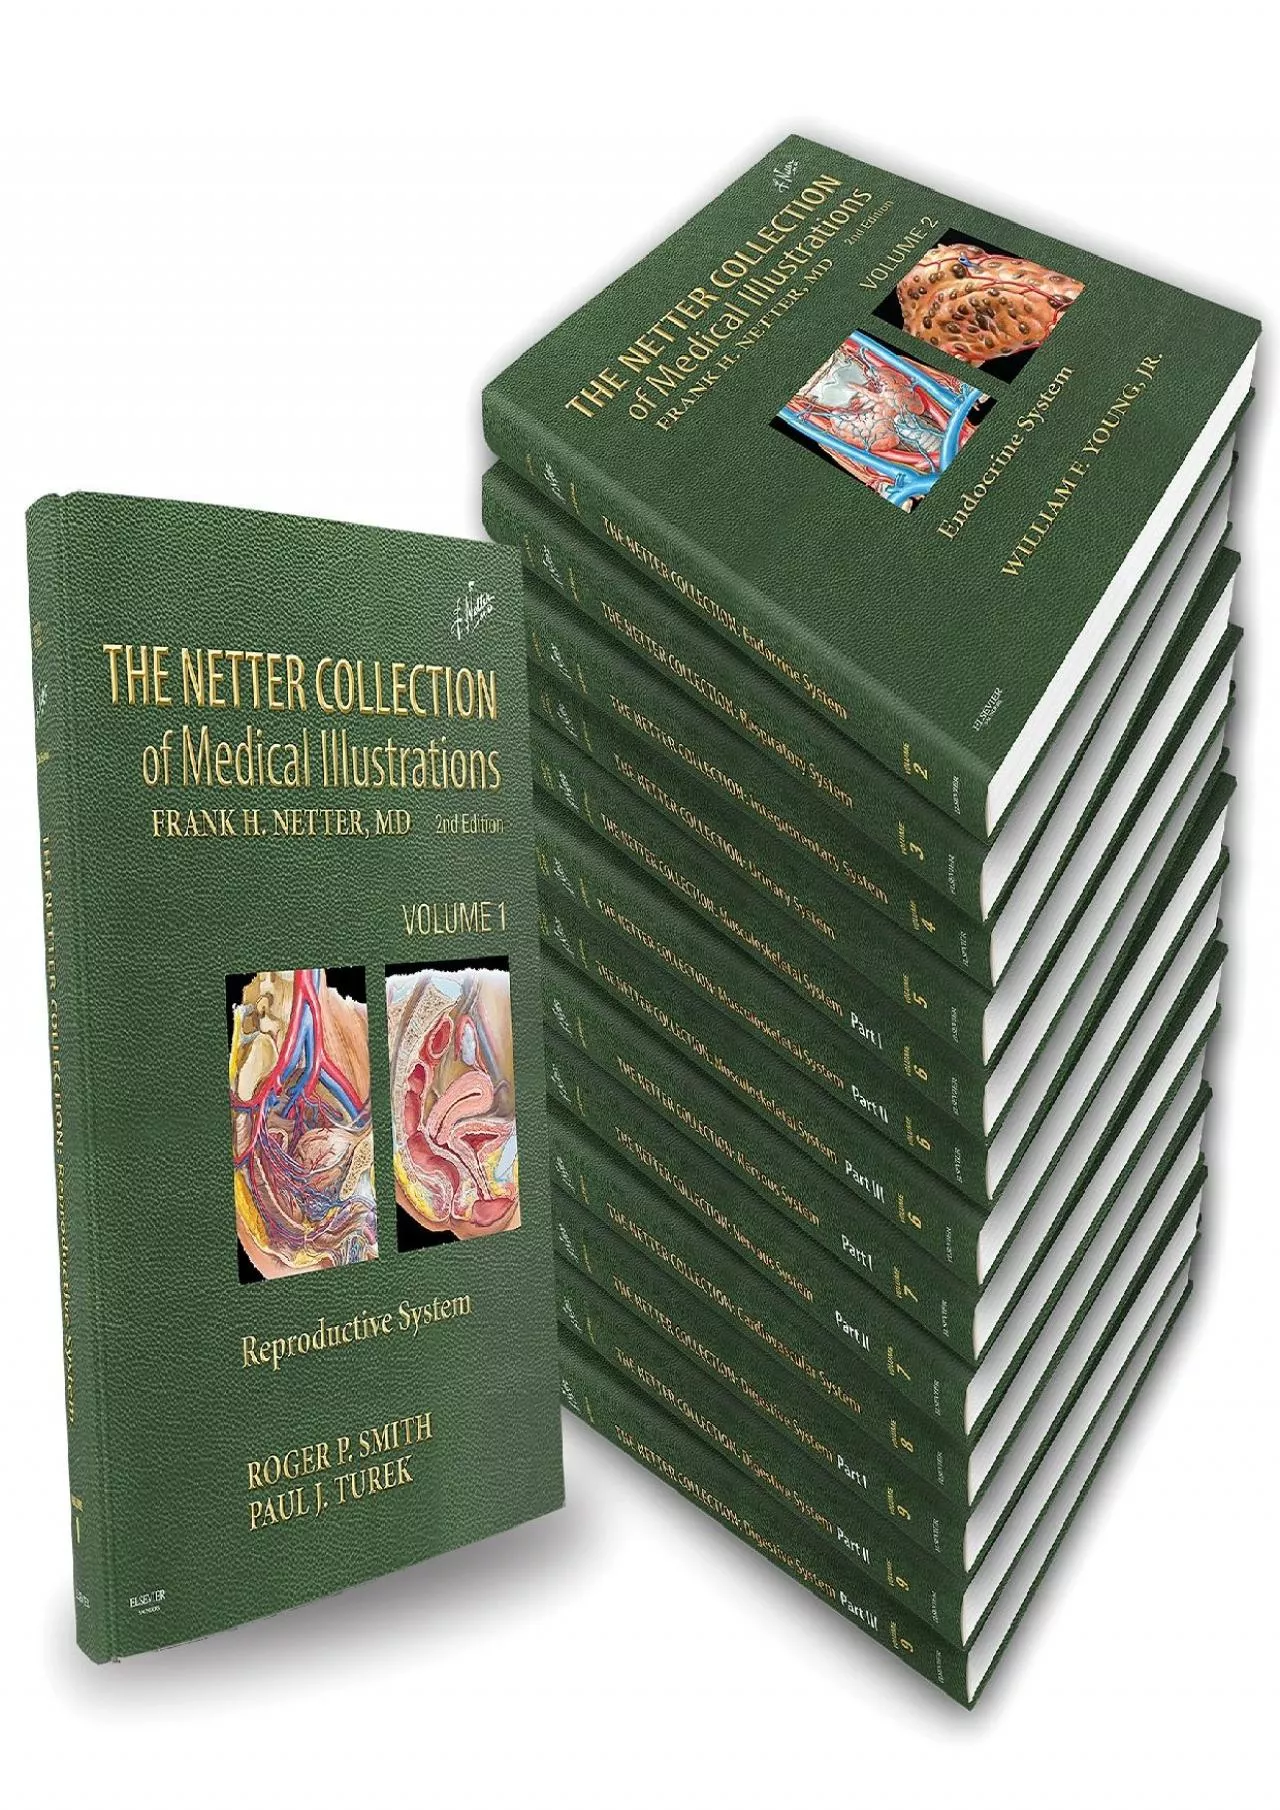 (DOWNLOAD)-The Netter Collection of Medical Illustrations Complete Package (Netter Green